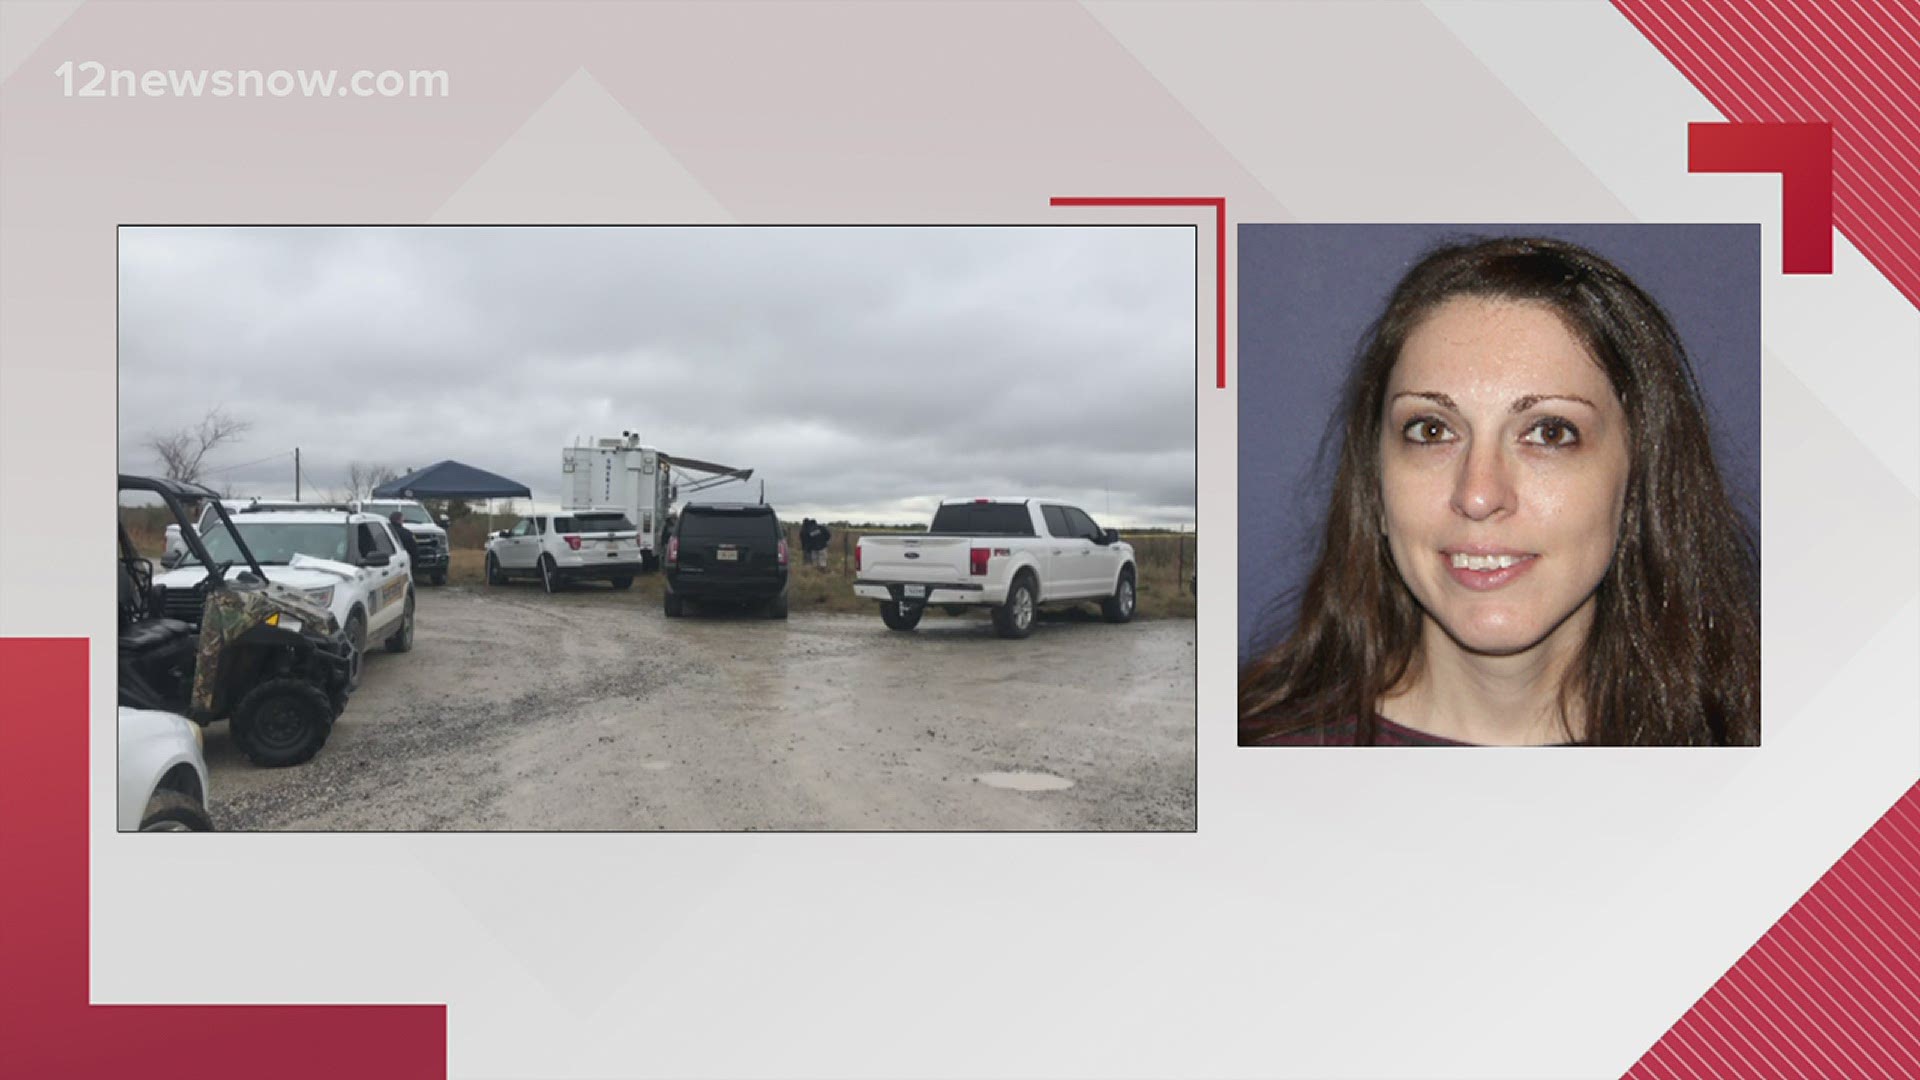 The Skeletal remains have been identified as Kayla Rice according to Beaumont Police Friday morning.